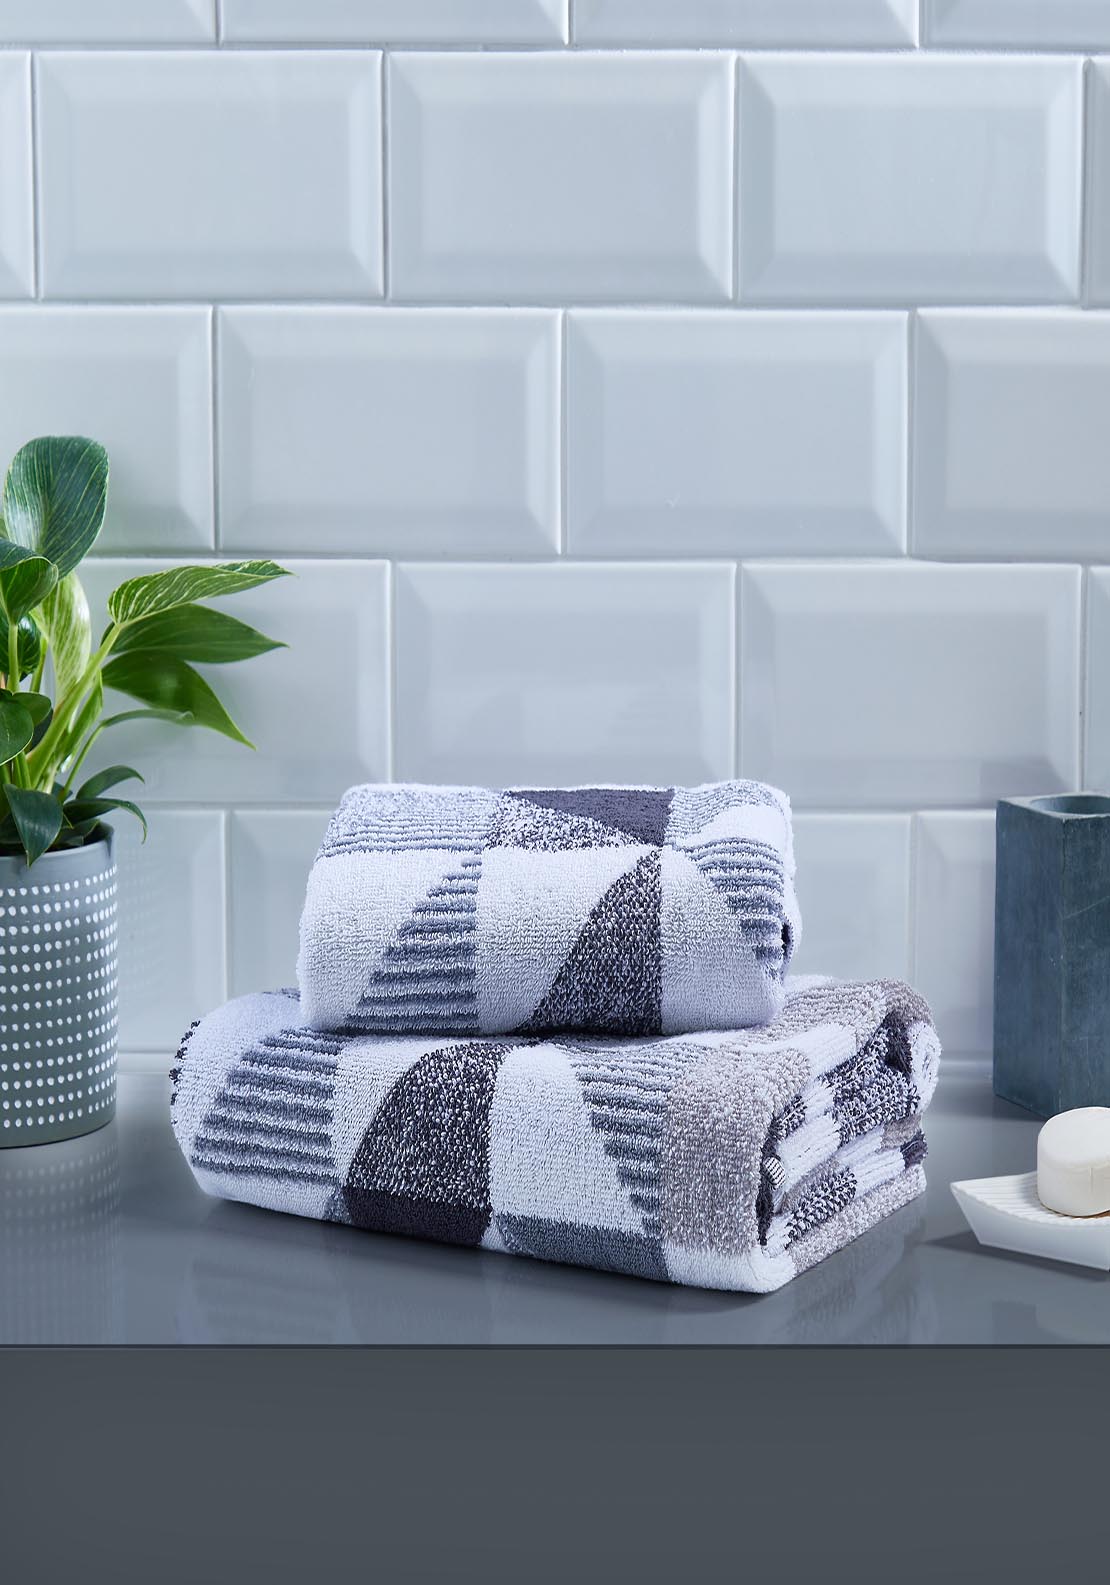 The Home Collection Hendra Bath Towel - Monochrome 3 Shaws Department Stores